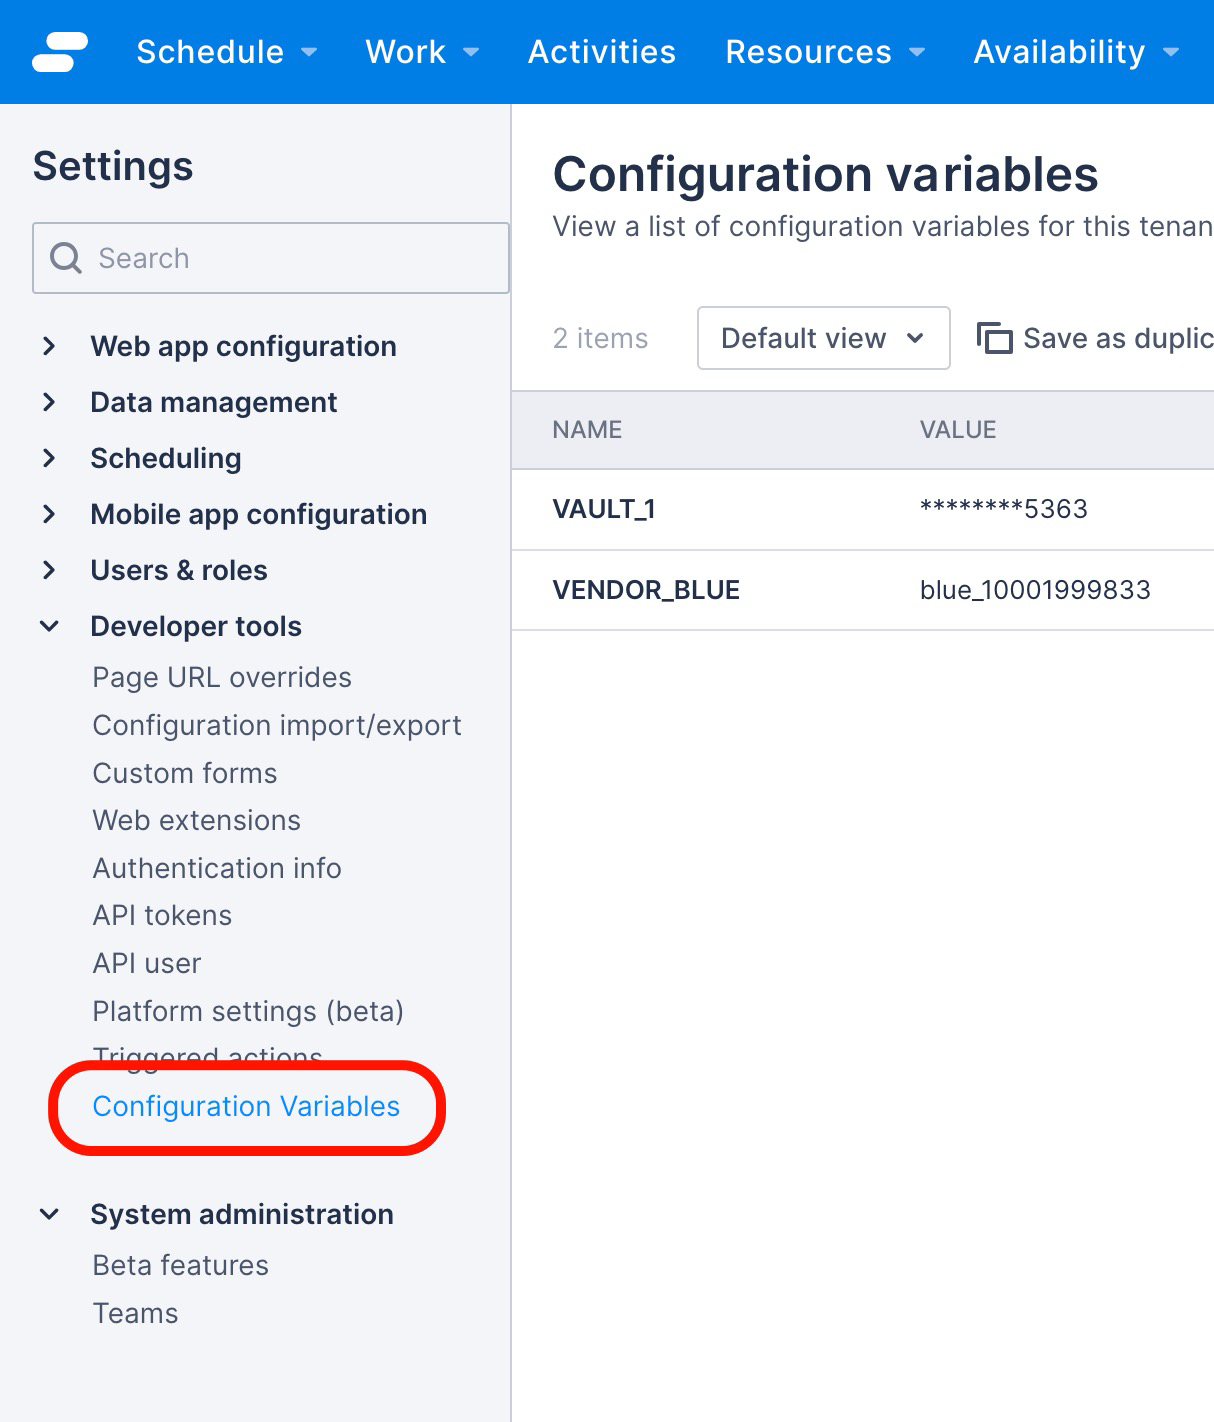 The Configuration variables list in admin settings.